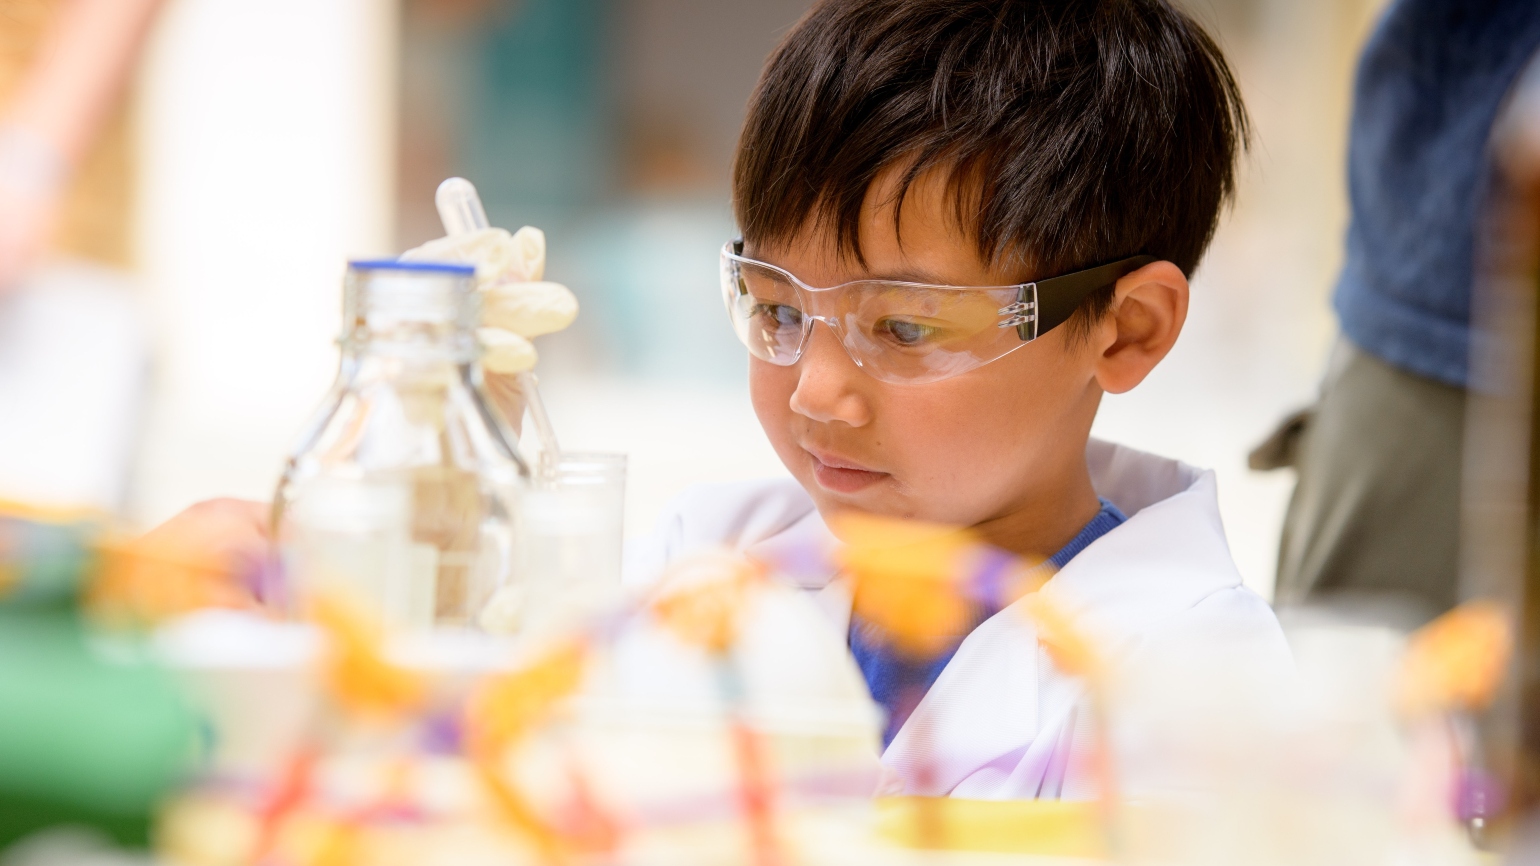 A child takes part in activities wearing a lab coat and goggles